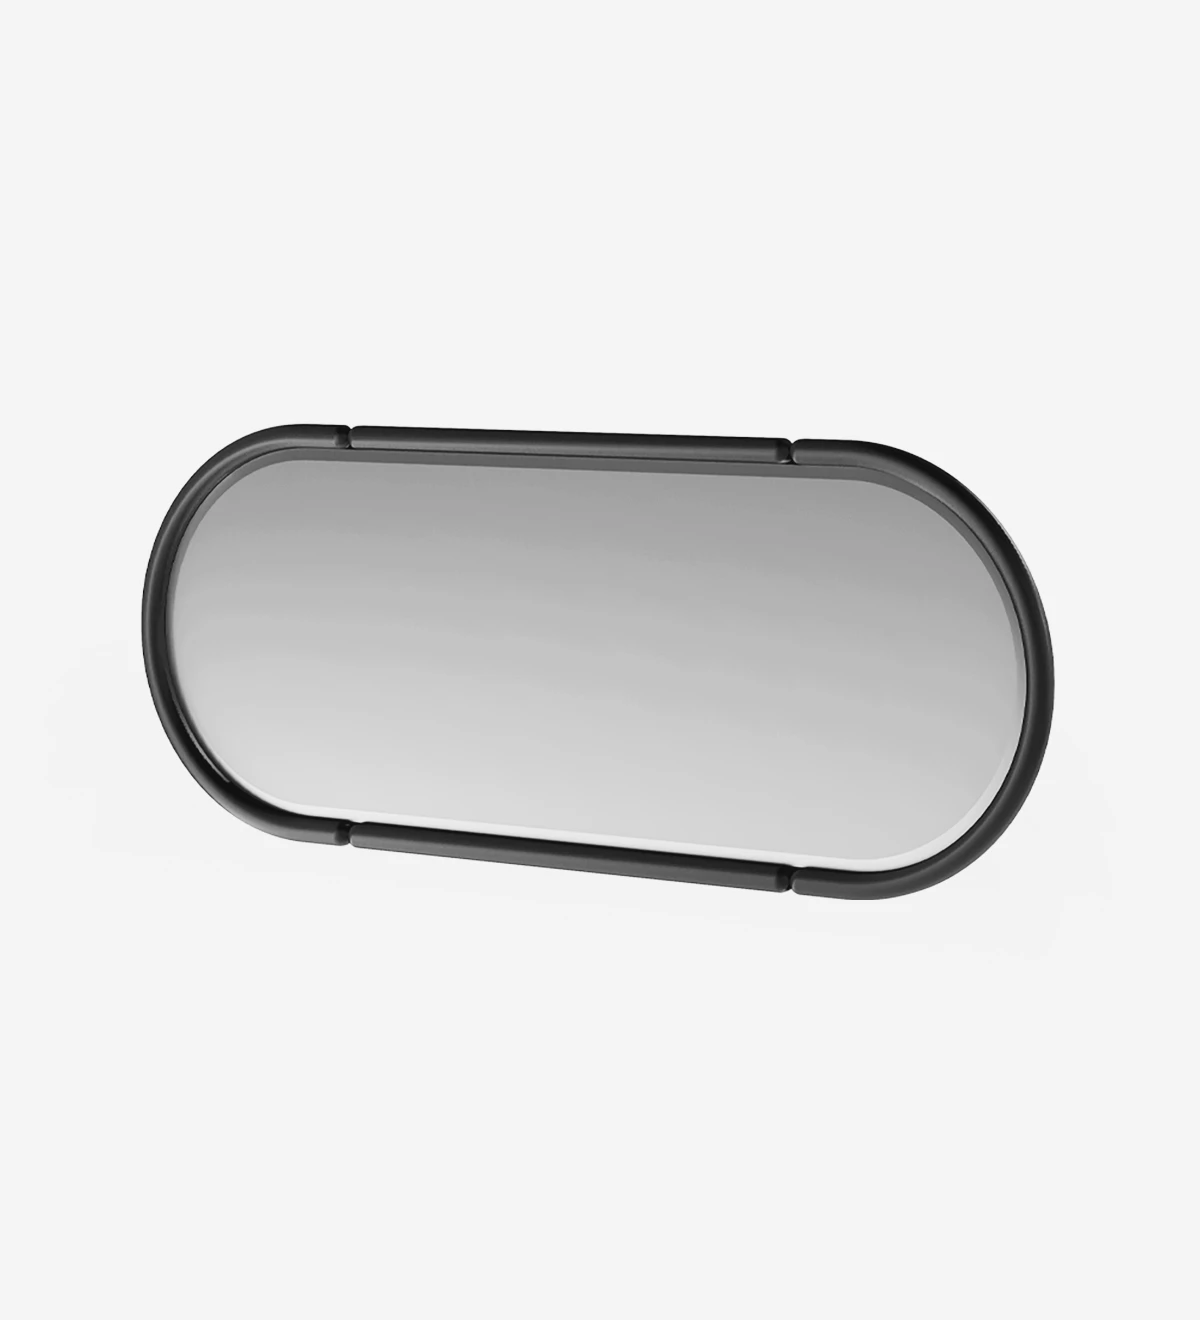 Black lacquered oval mirror